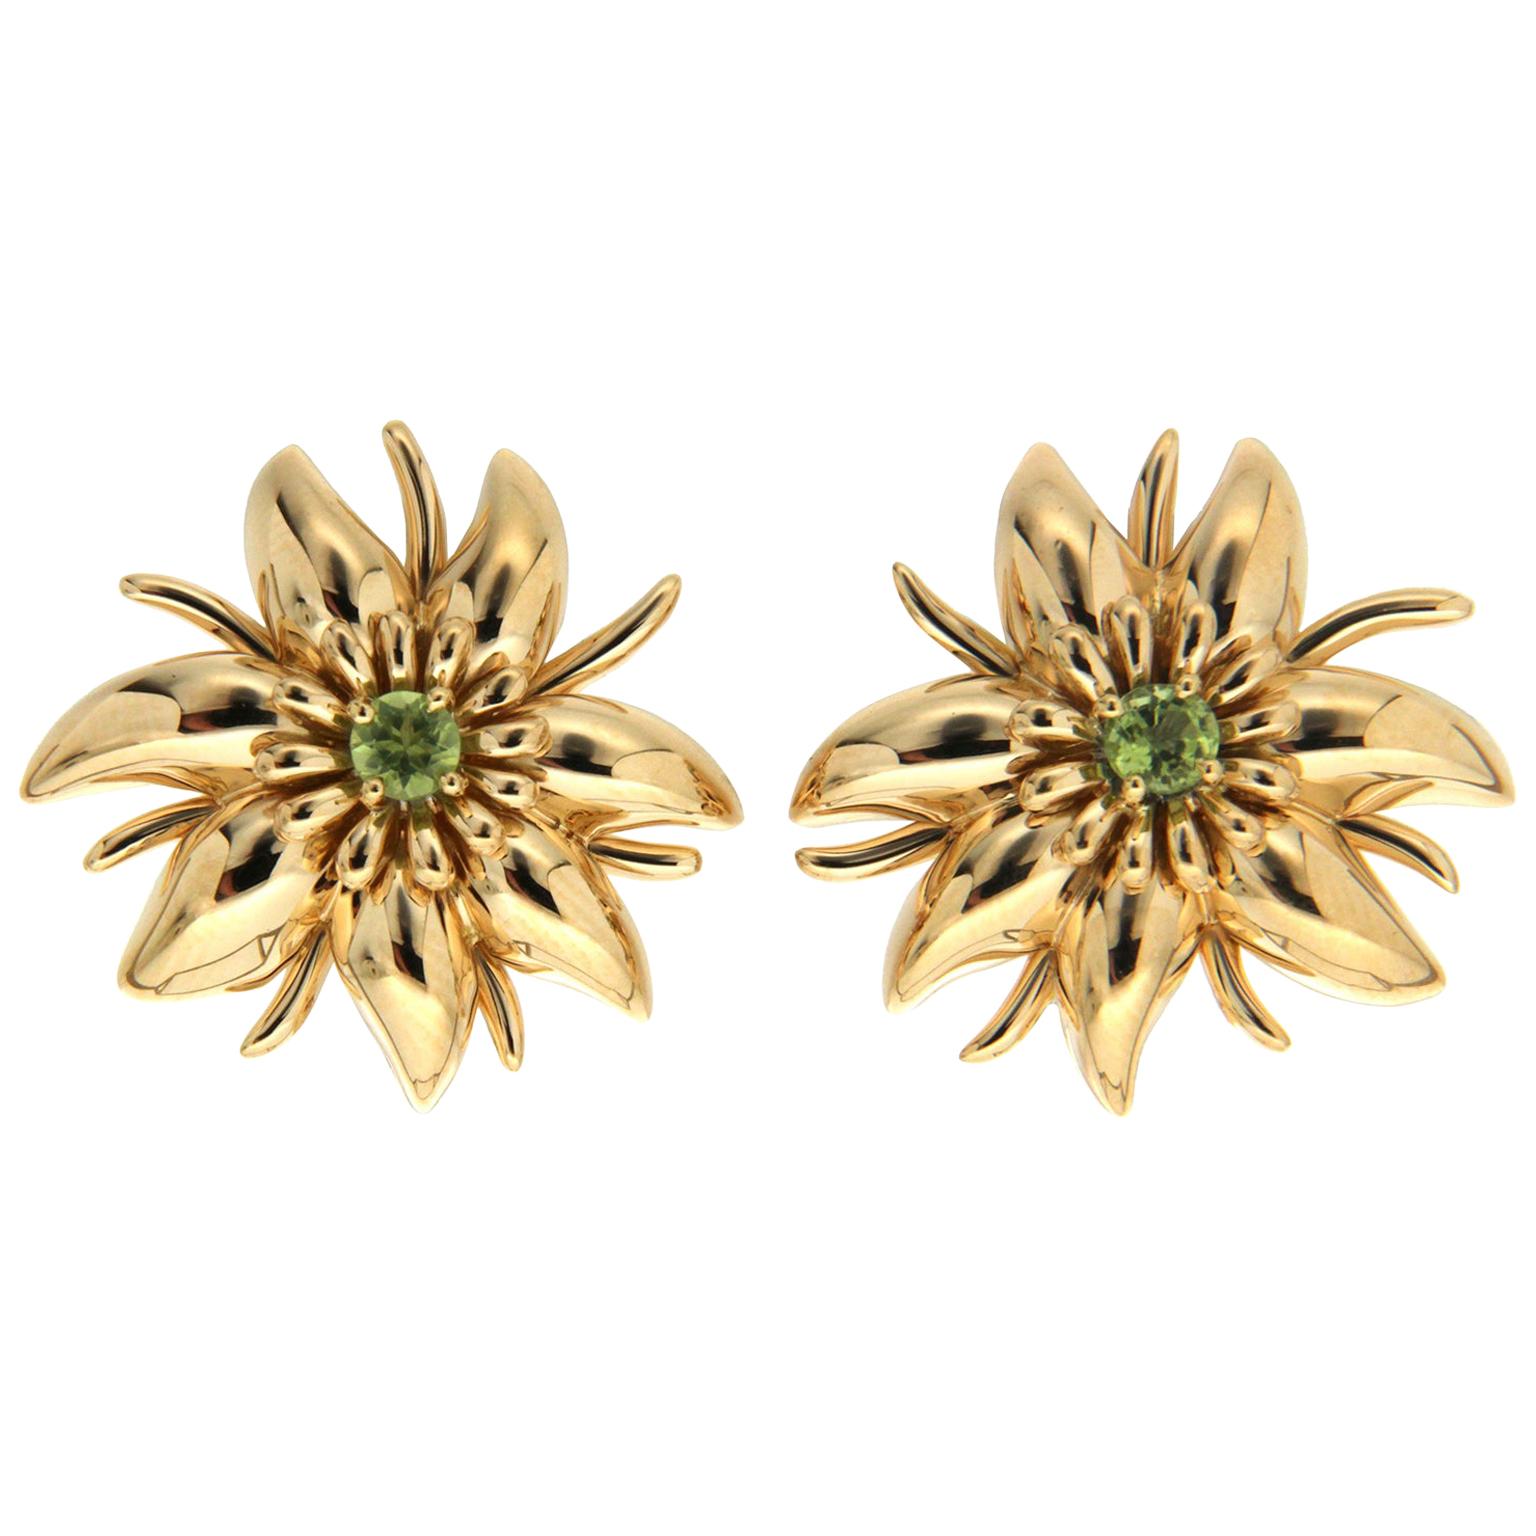 Valentin Magro Gold Flower Petal Earrings with Peridots